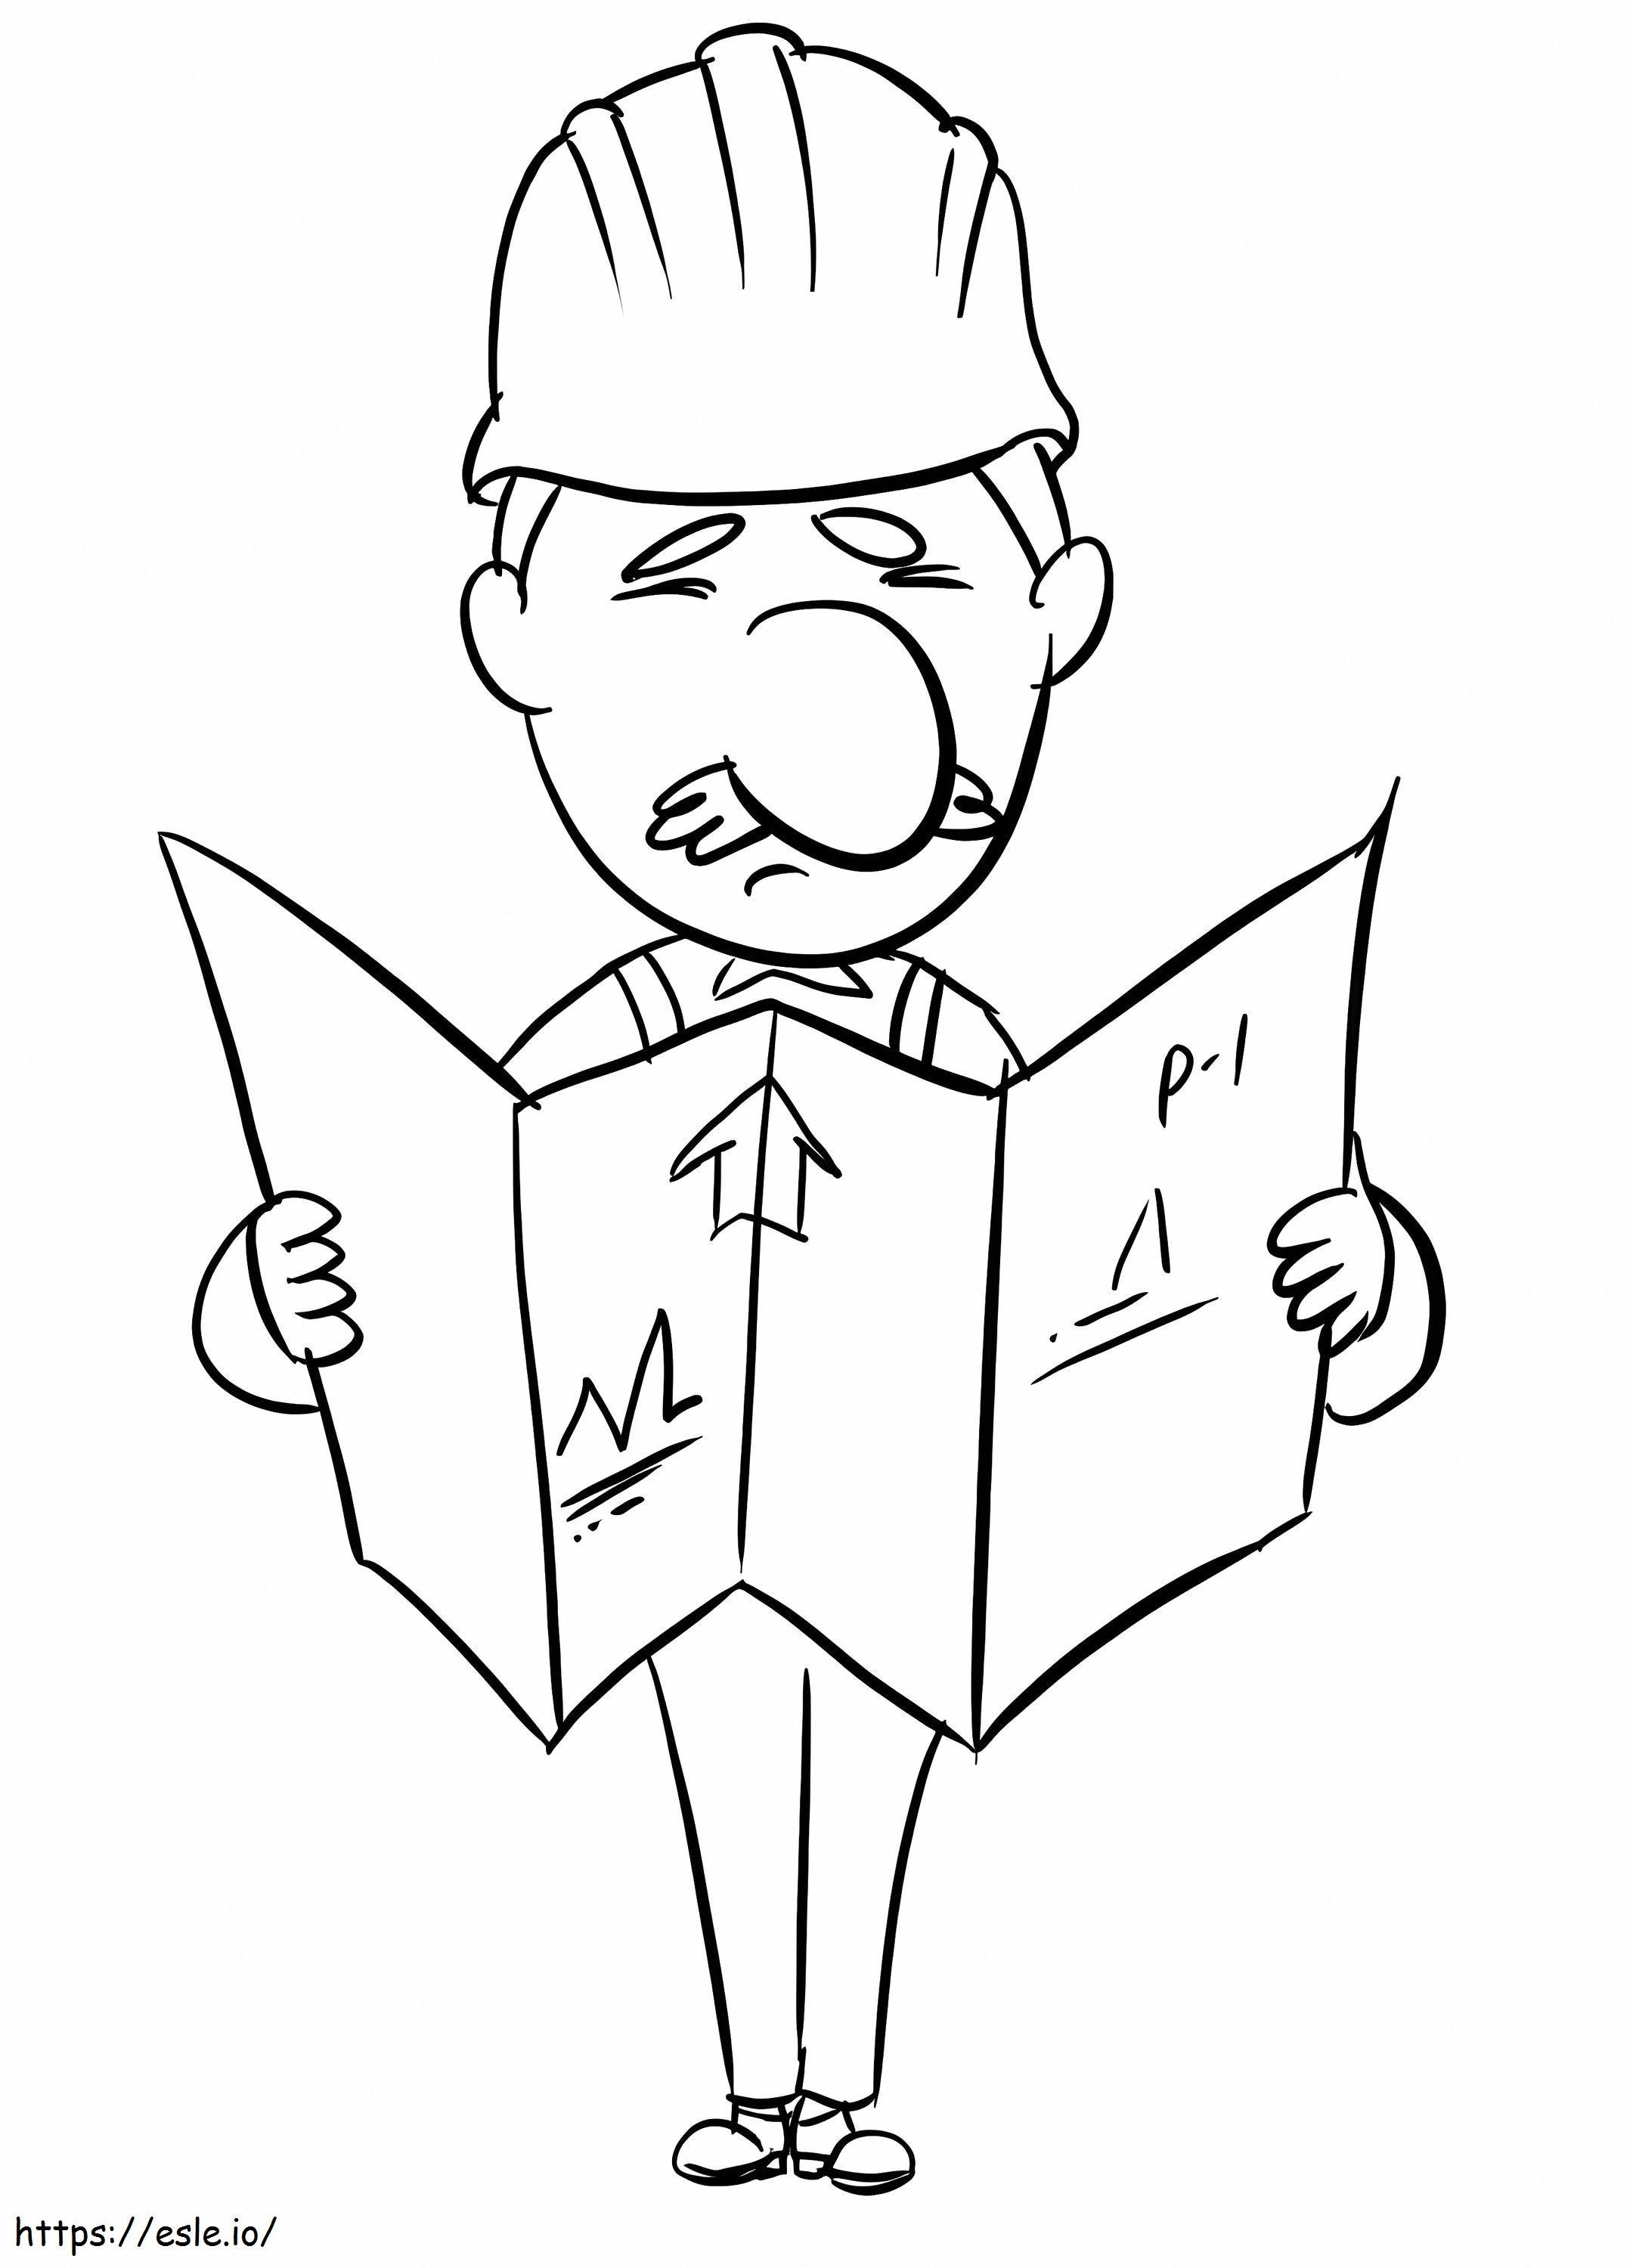 Old Engineer coloring page